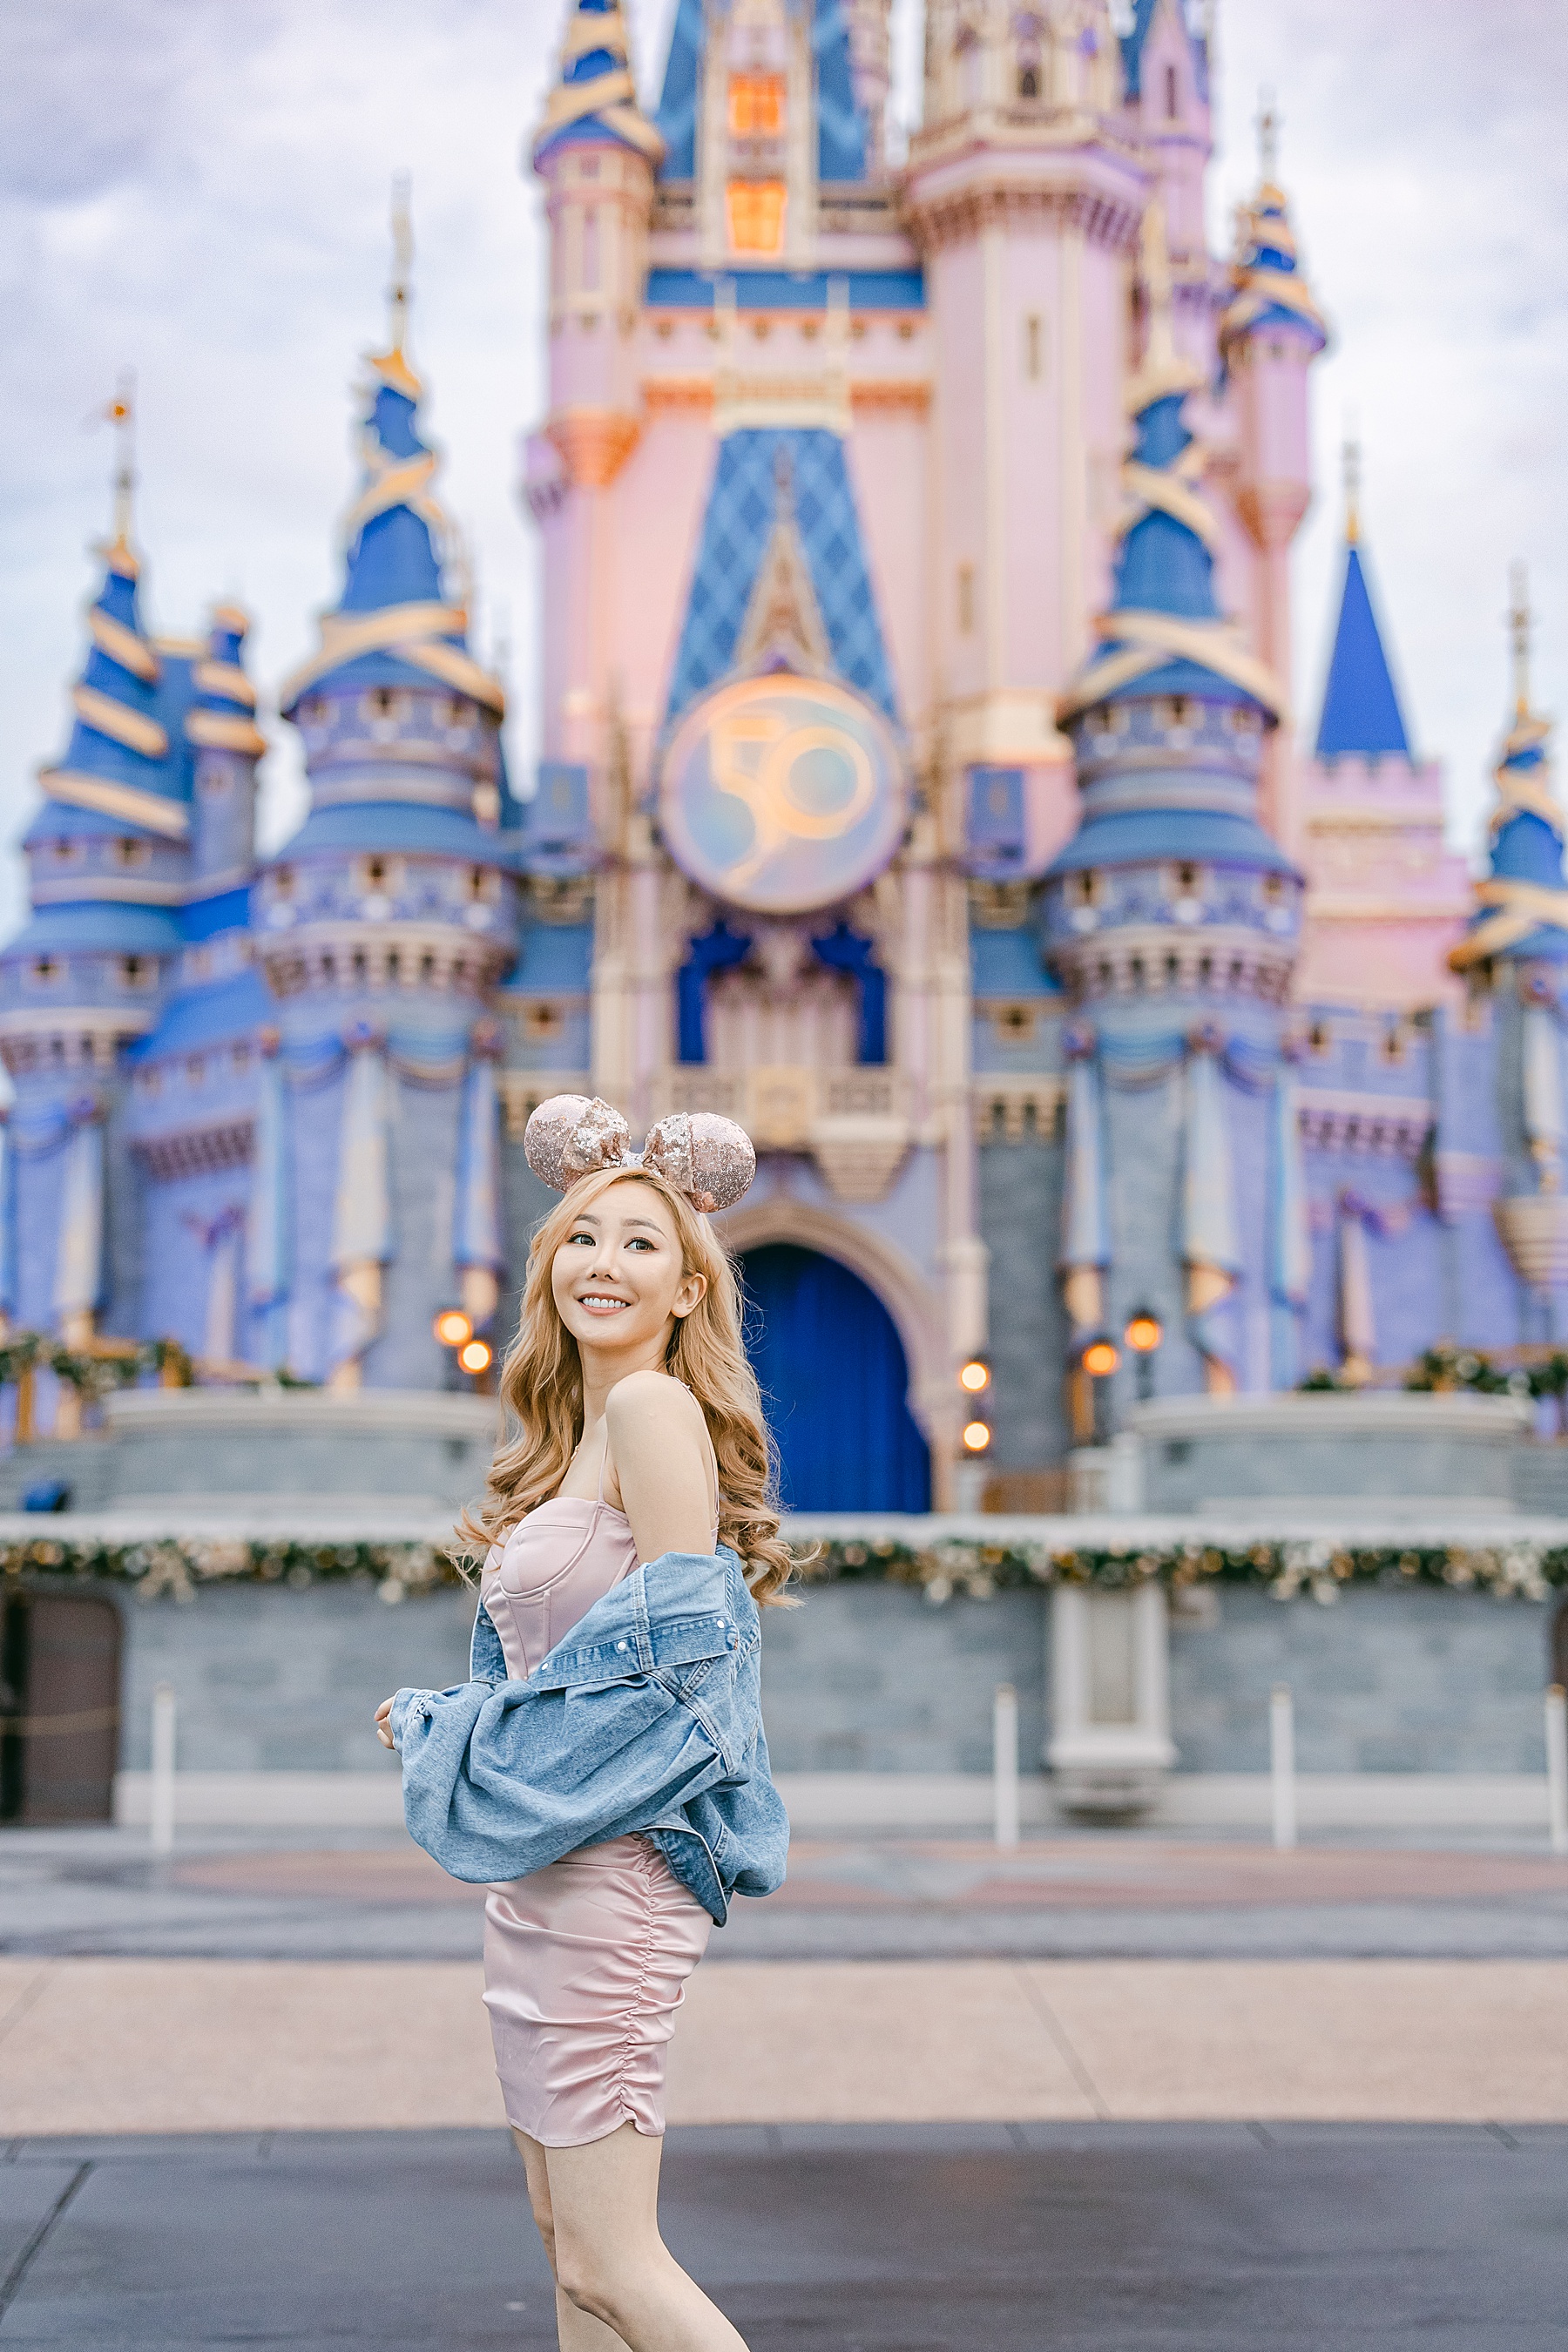 asian woman in fitted pink dress and jean jacket smiling in front of Cinderella's Castle